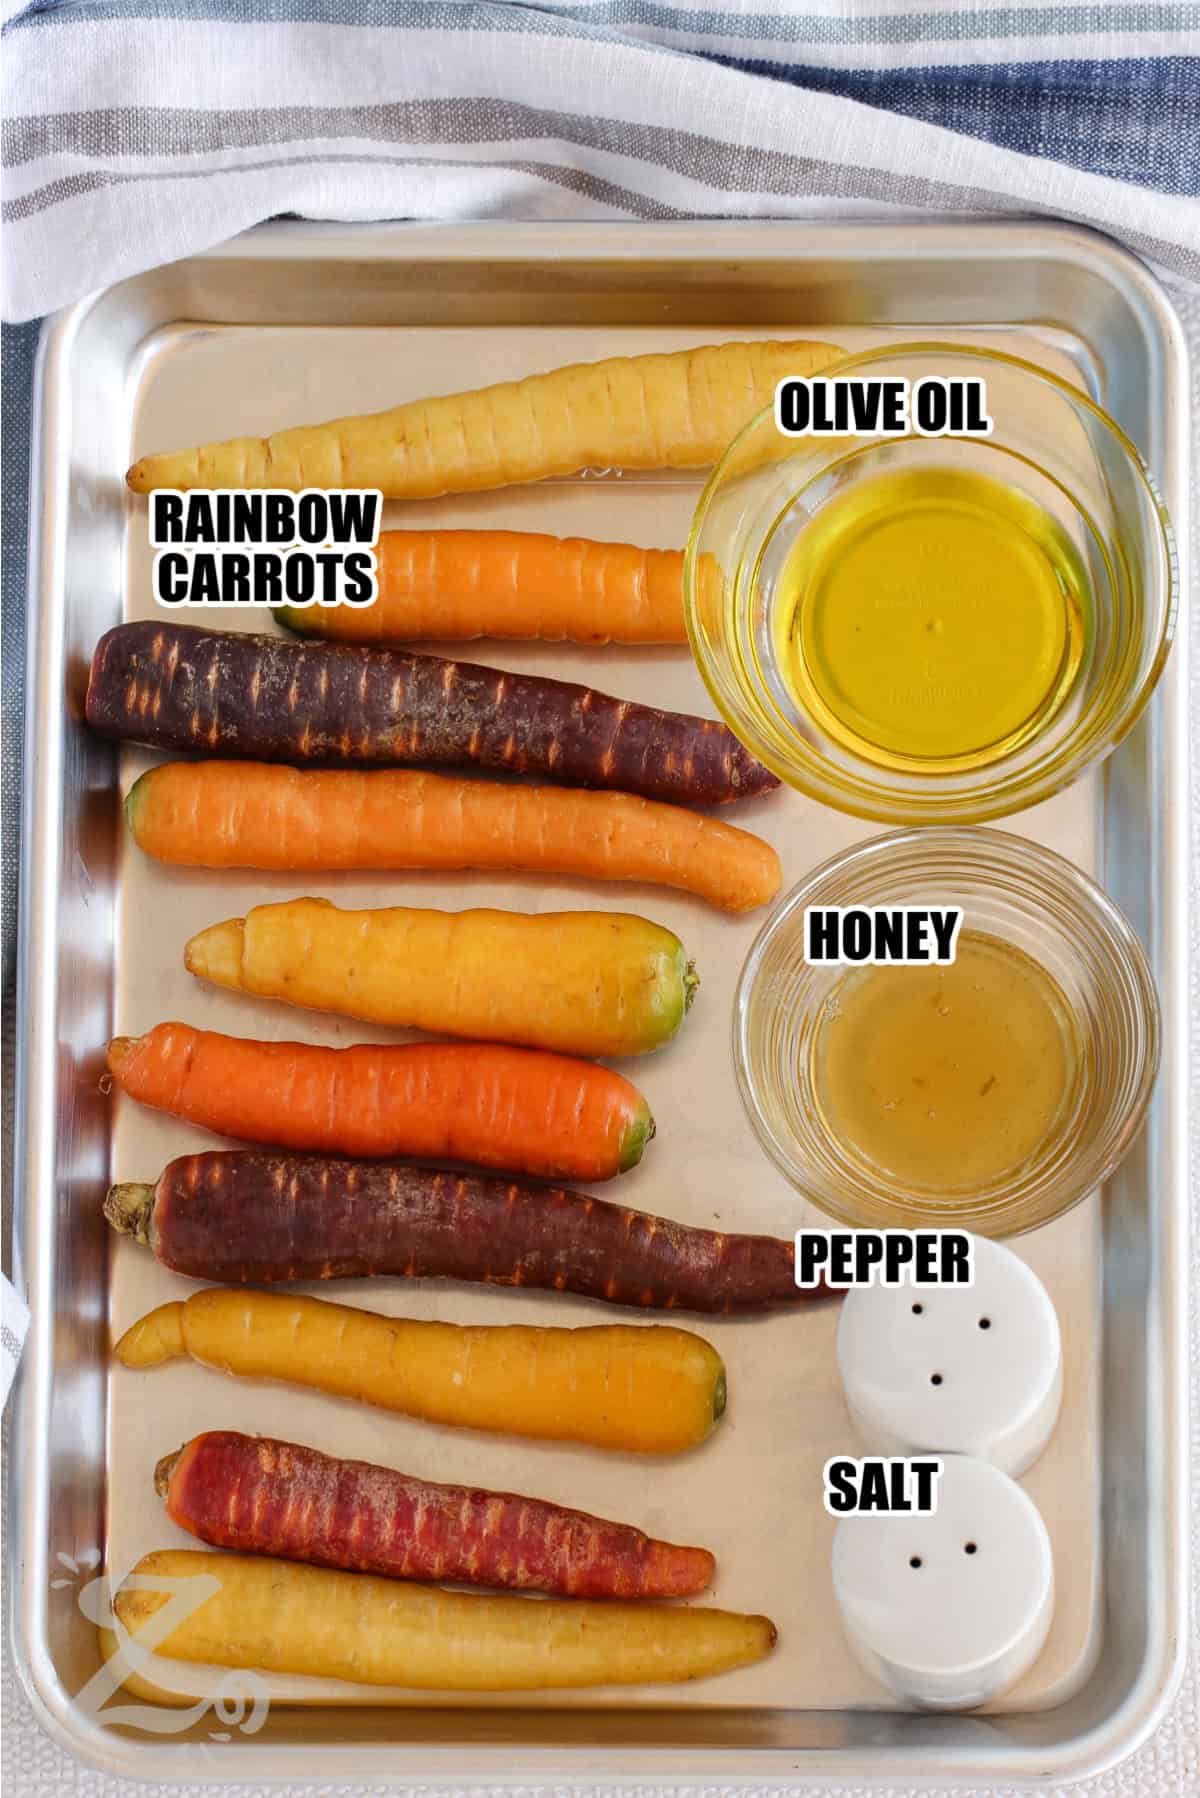 ingredients to make roasted rainbow carrots labelled: rainbow carrots, olive oil, honey, salt and pepper.